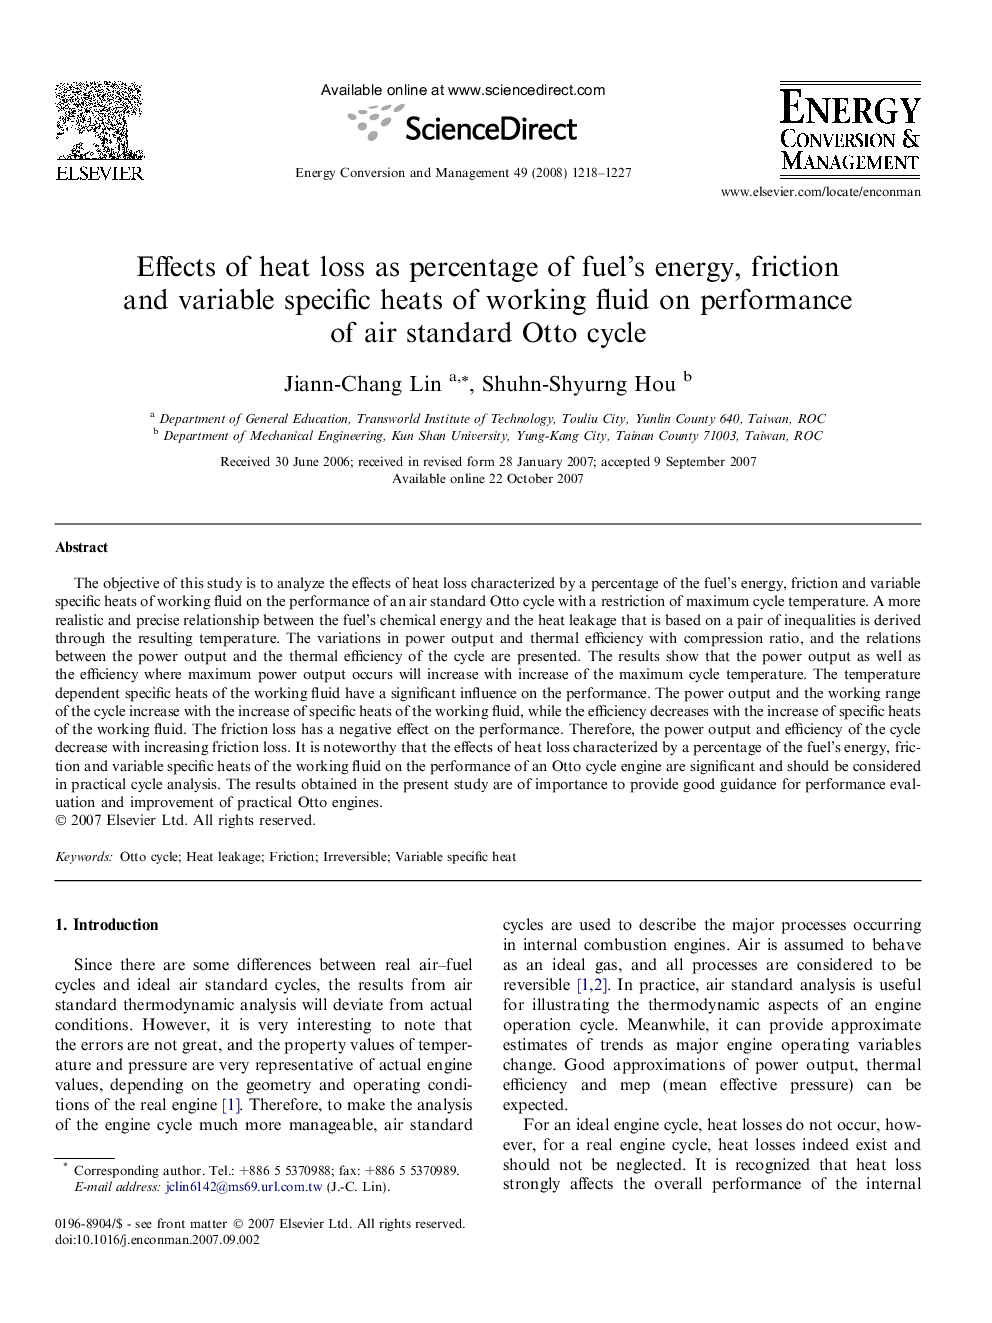 Effects of heat loss as percentage of fuel’s energy, friction and variable specific heats of working fluid on performance of air standard Otto cycle